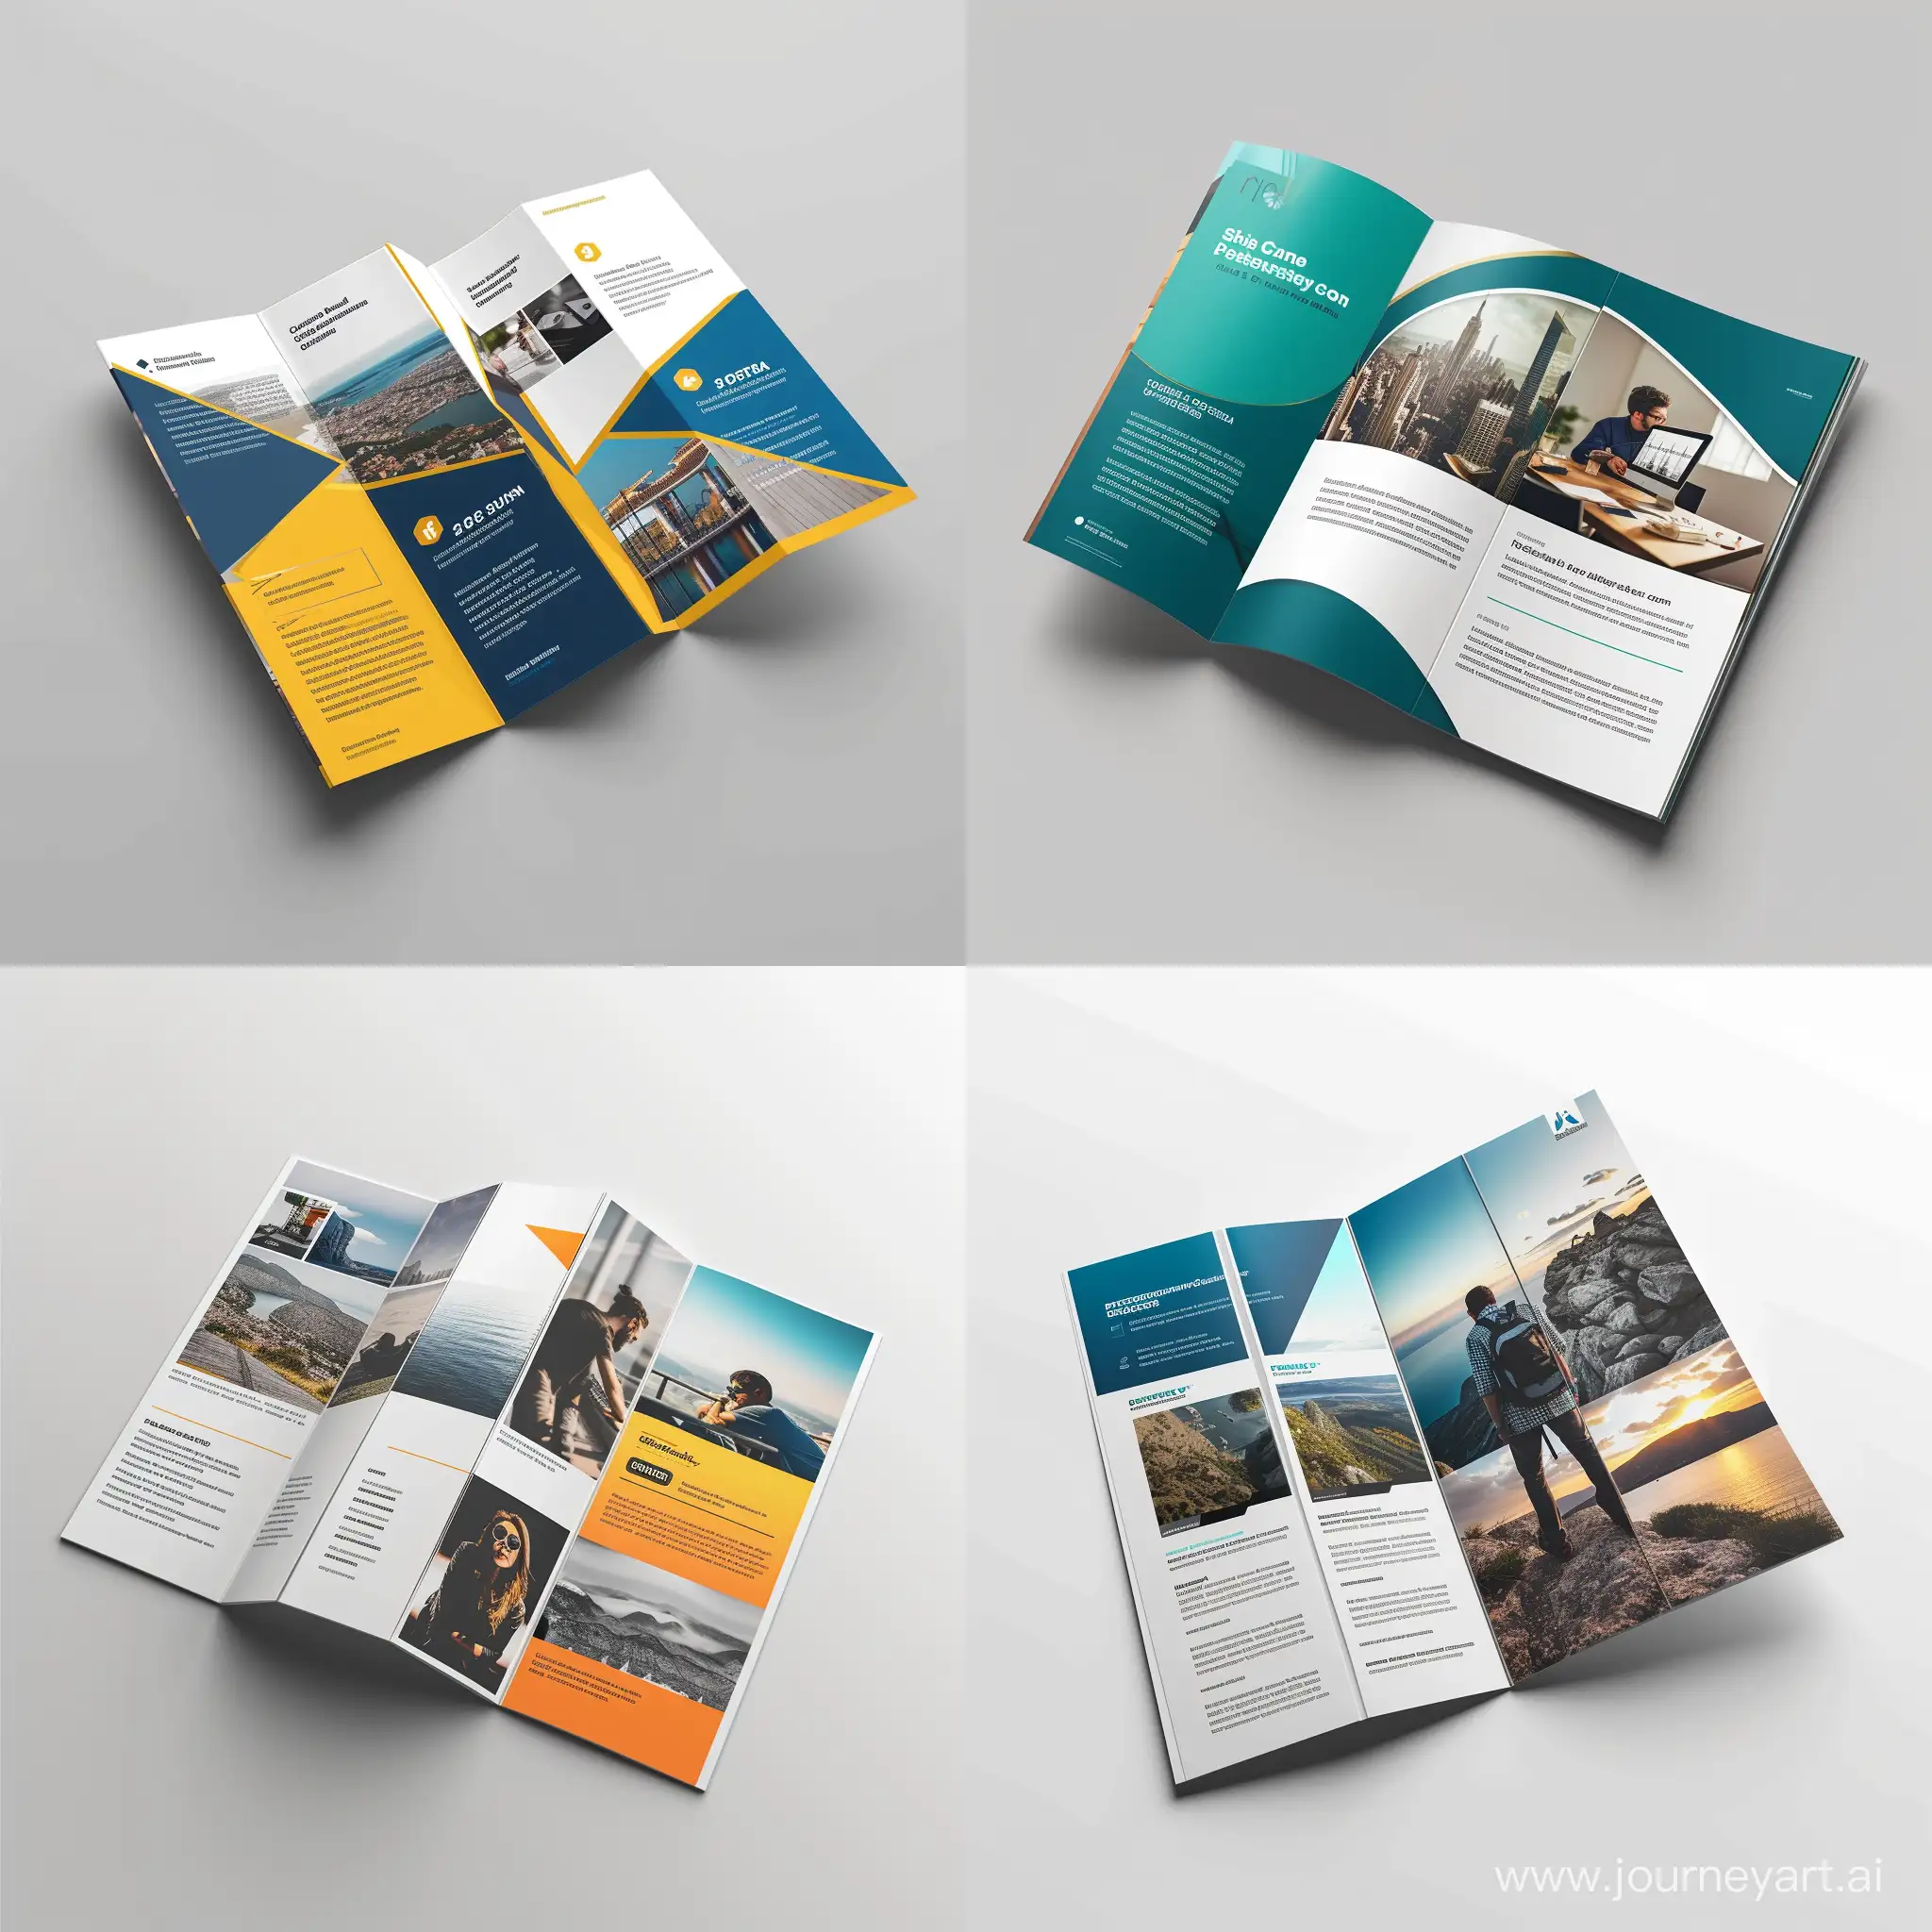 Design Professional Brochures, Catalogs, and Flyer